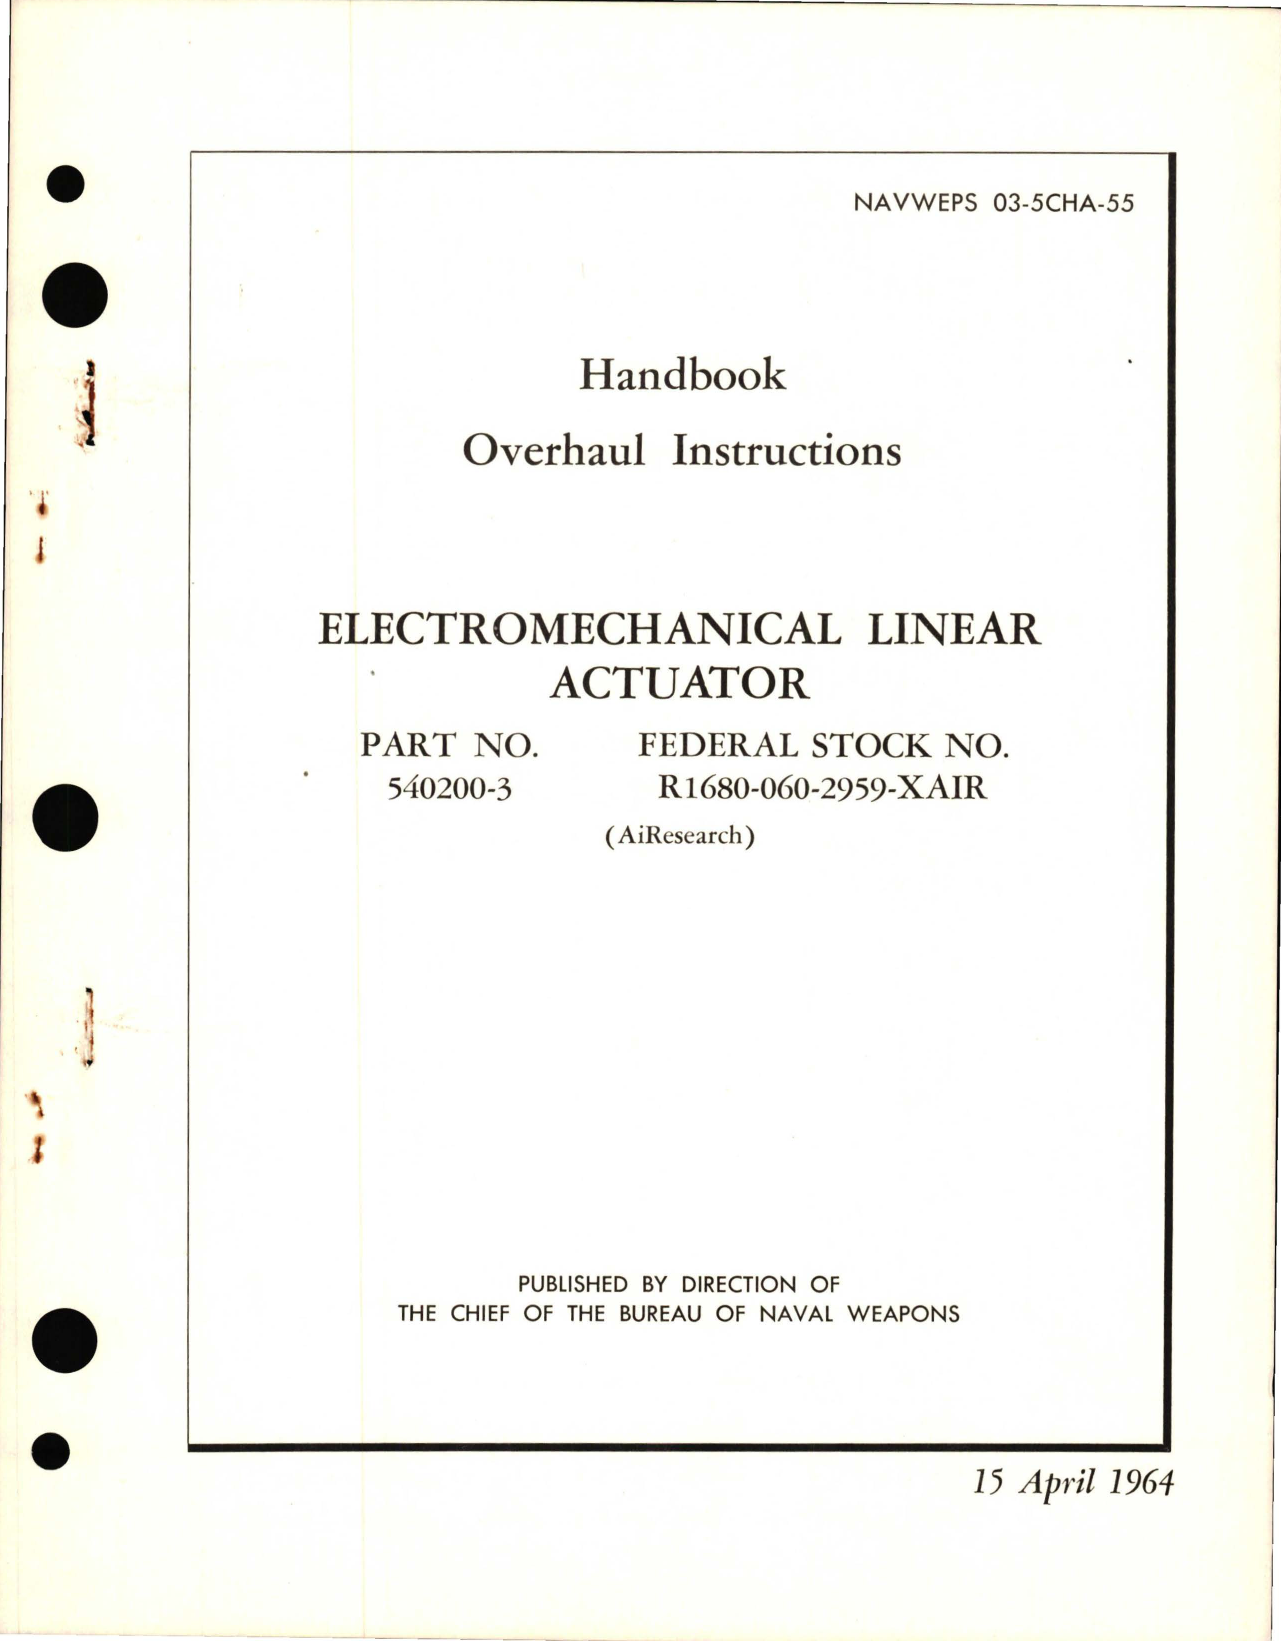 Sample page 1 from AirCorps Library document: Overhaul Instructions for Electromechanical Linear Actuator - Part 540200-3 